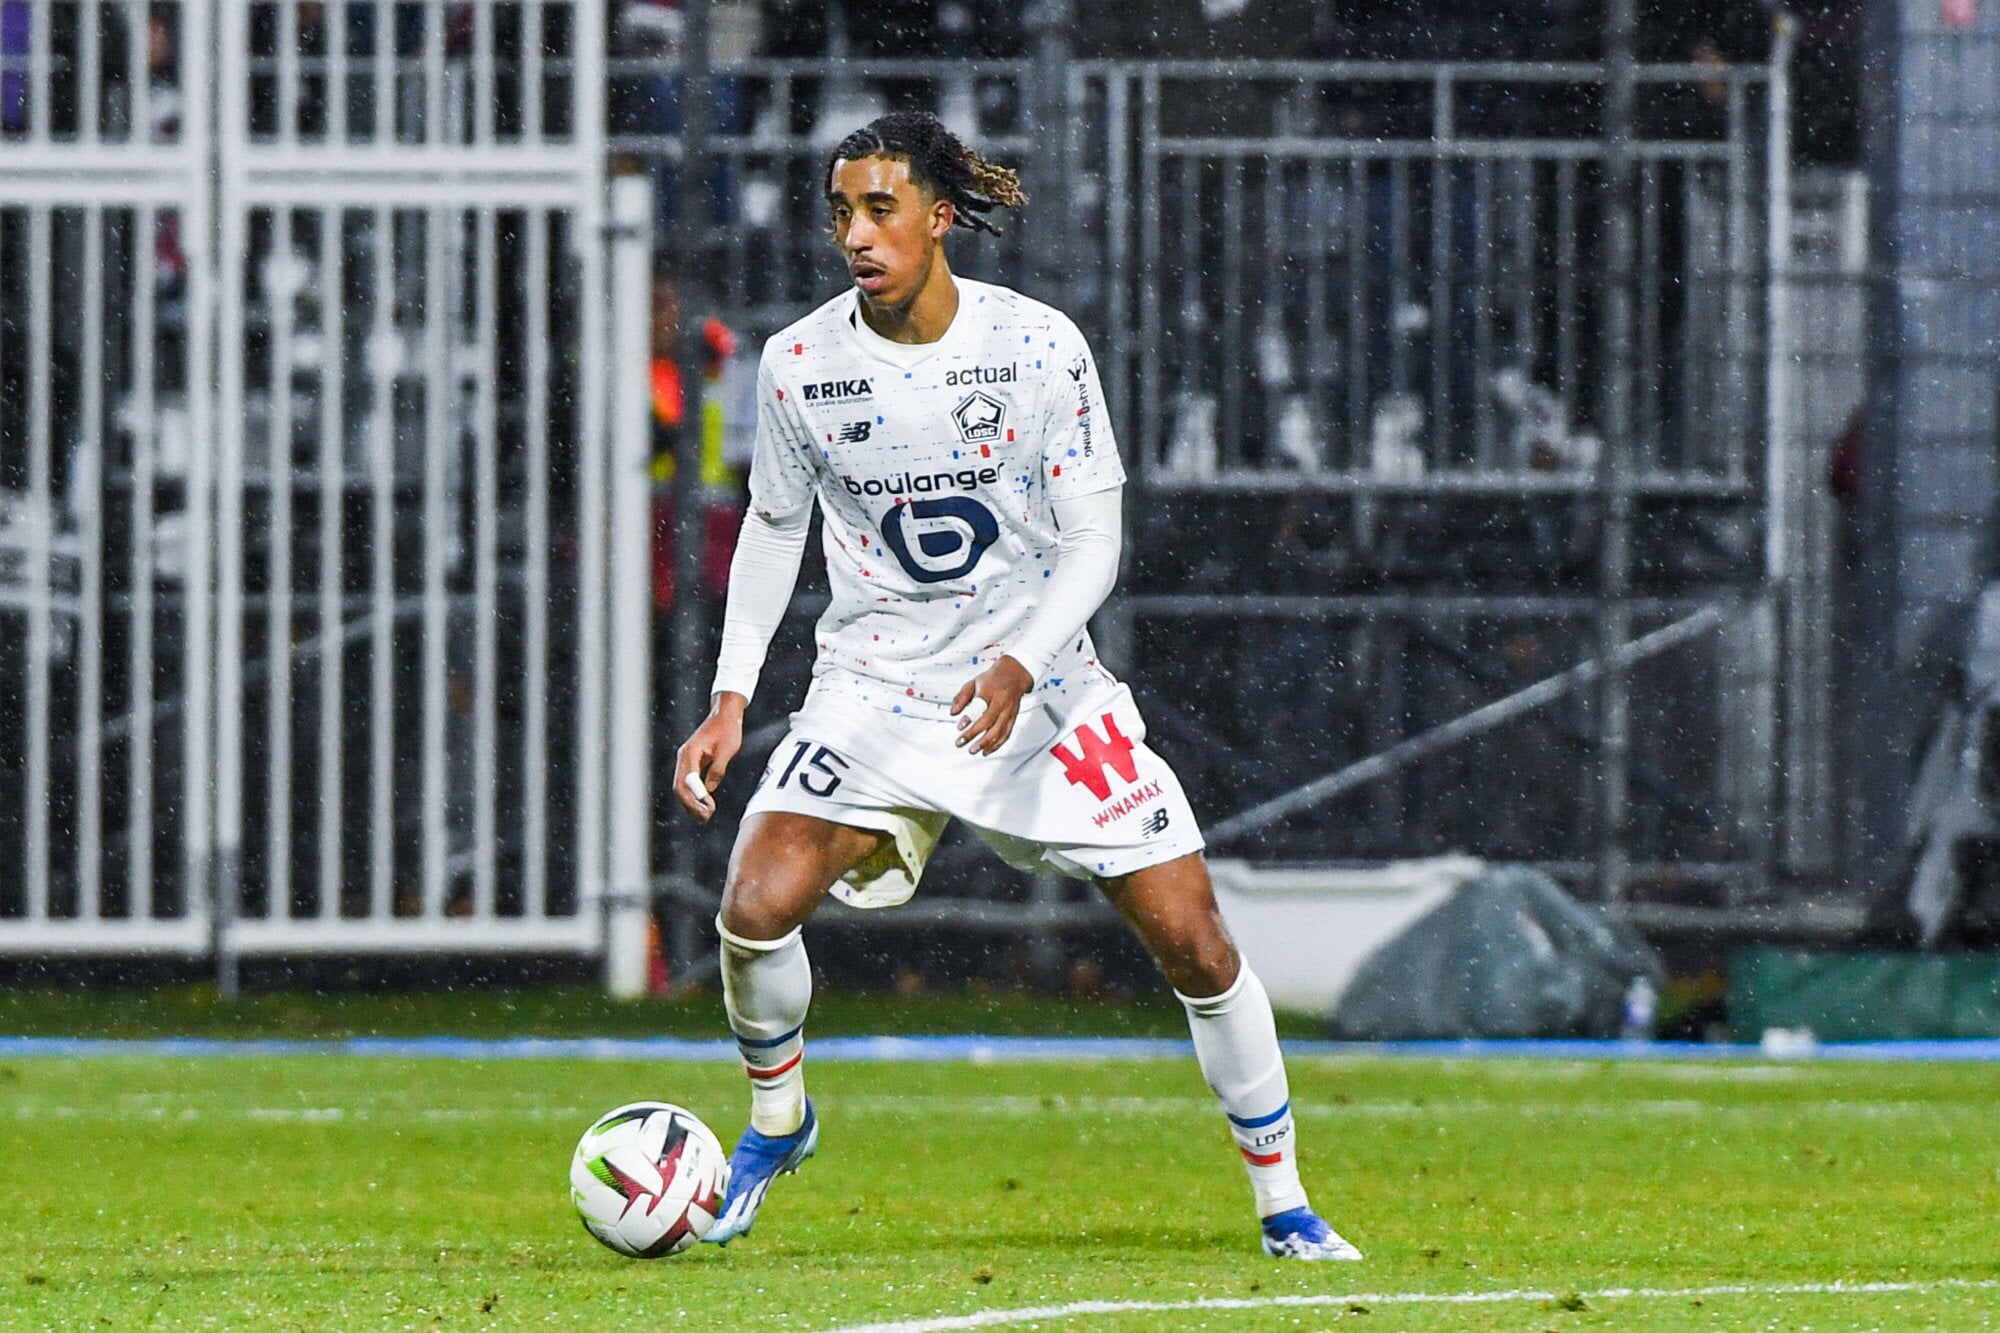 LOSC Lille's Leny Yoro on the ball